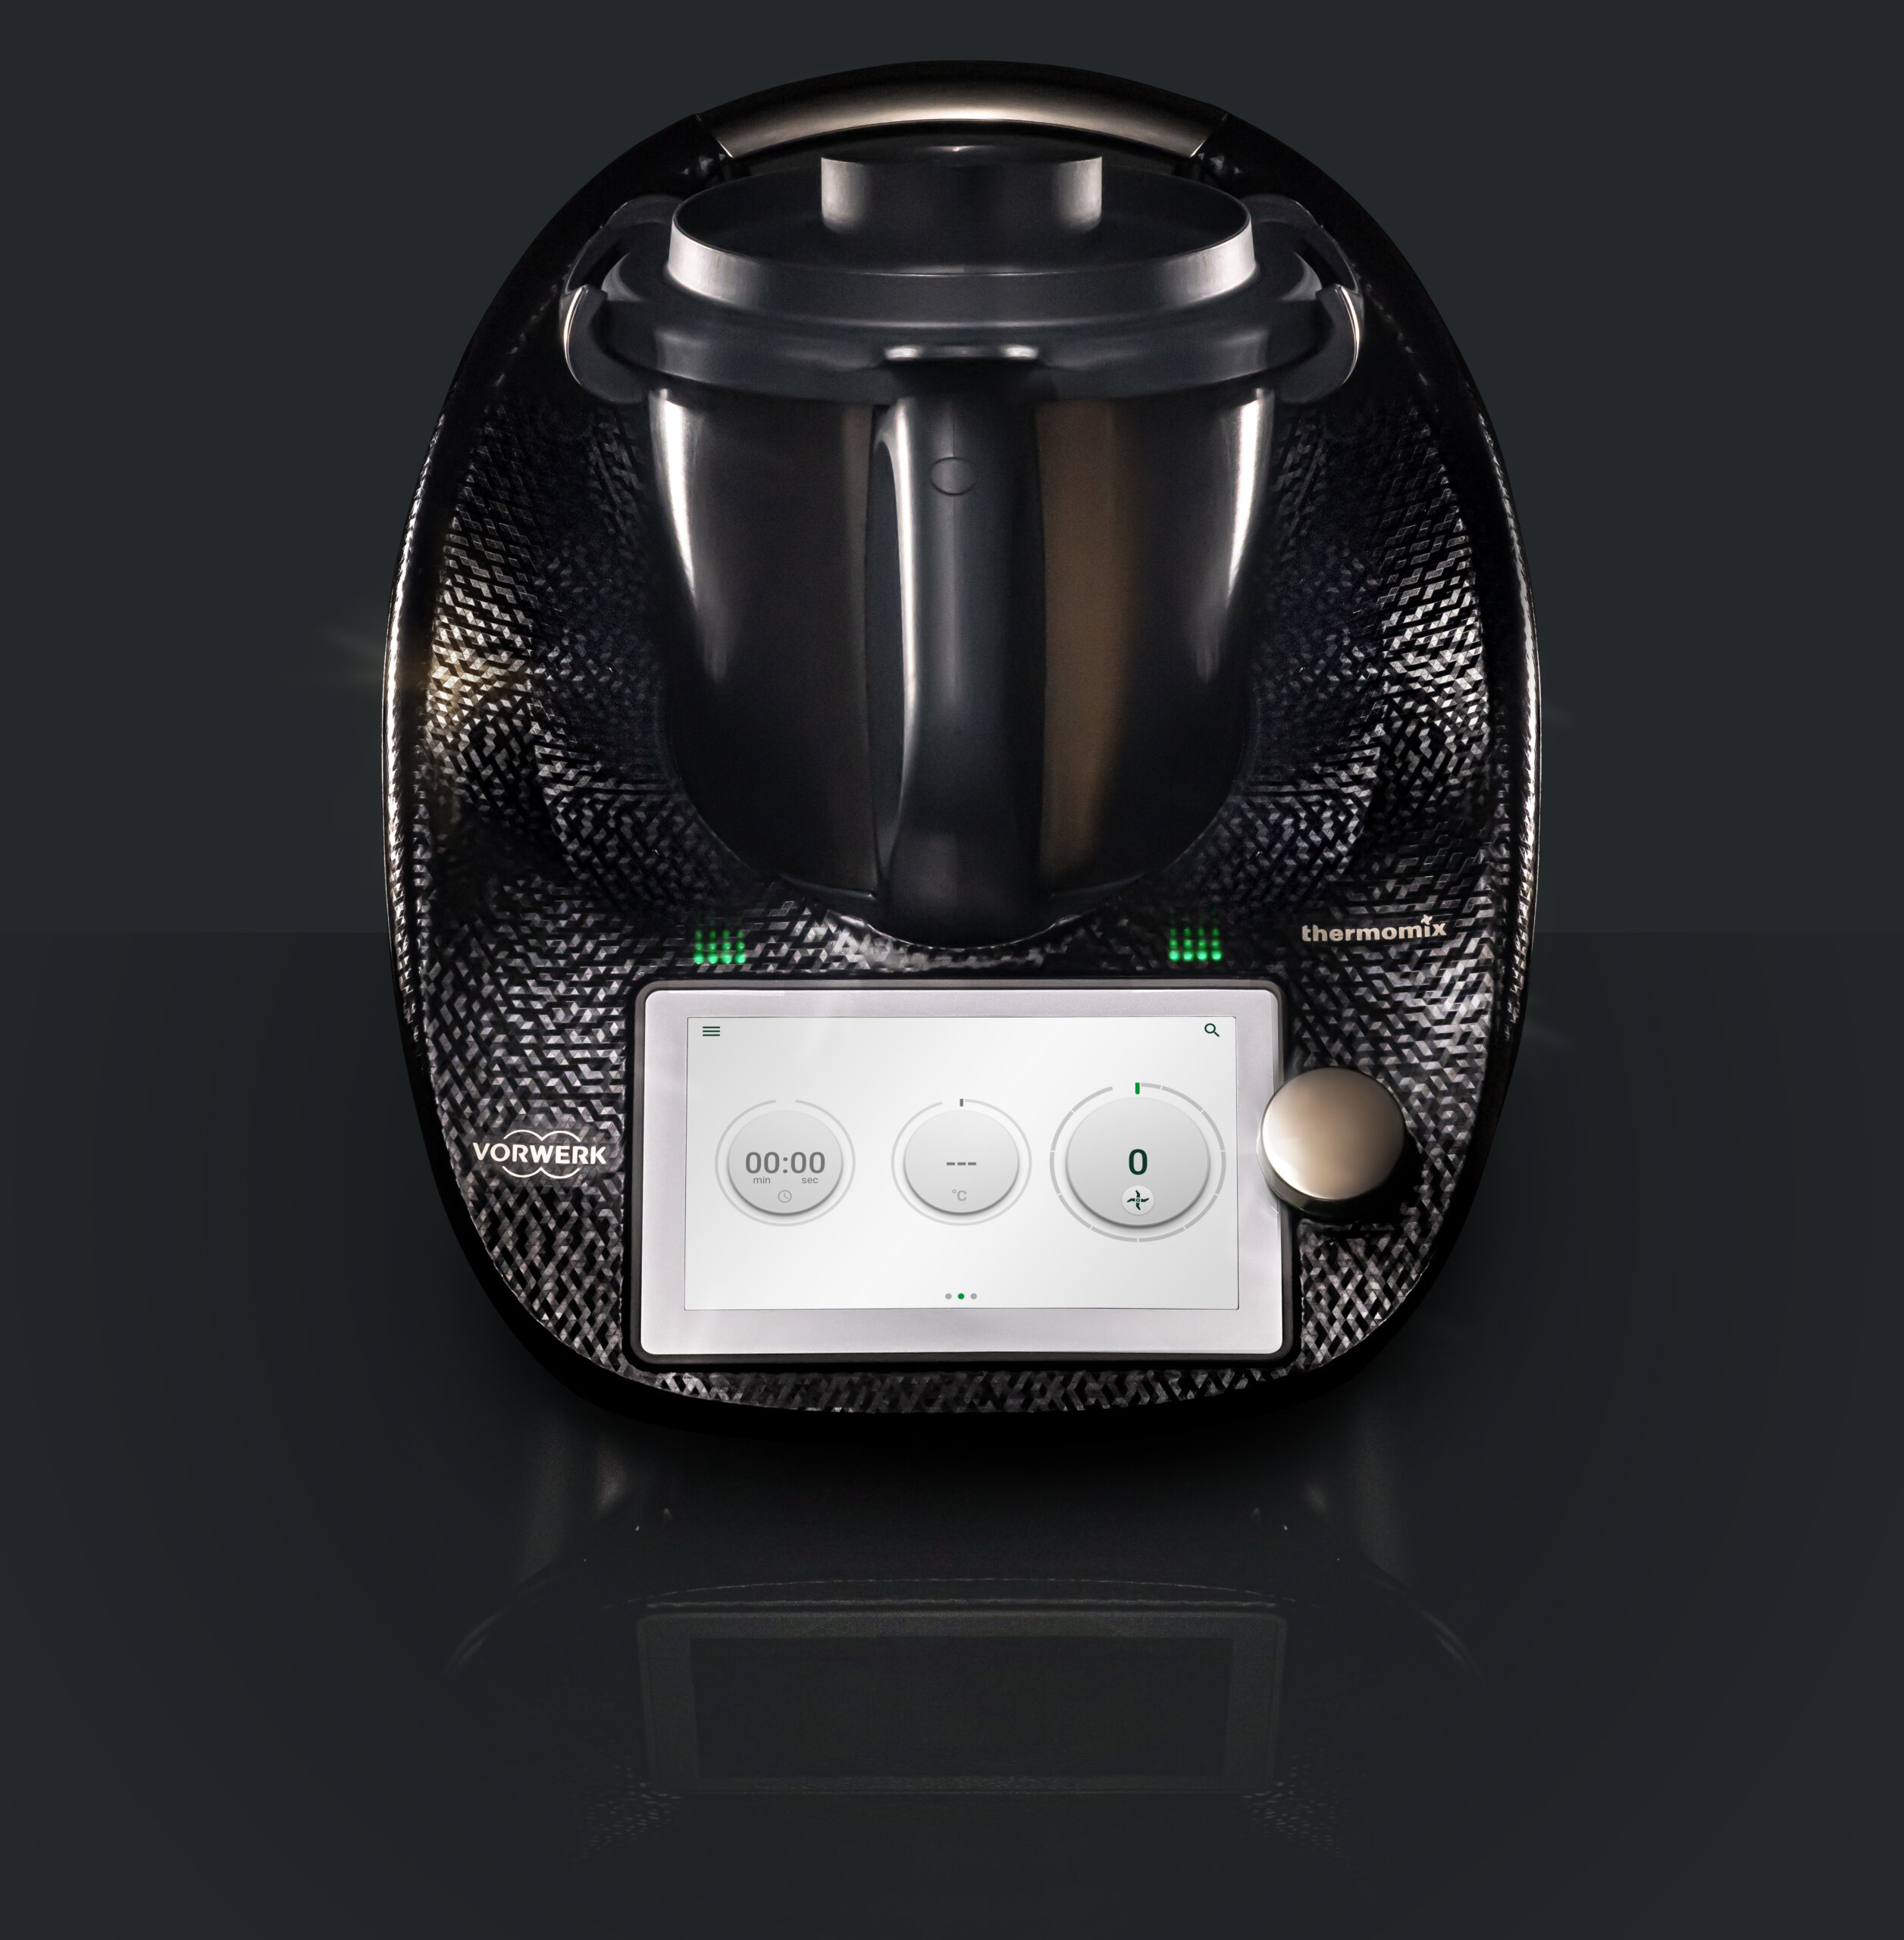 int_thermomix_TM6_sparkling-black_product-close-up_001